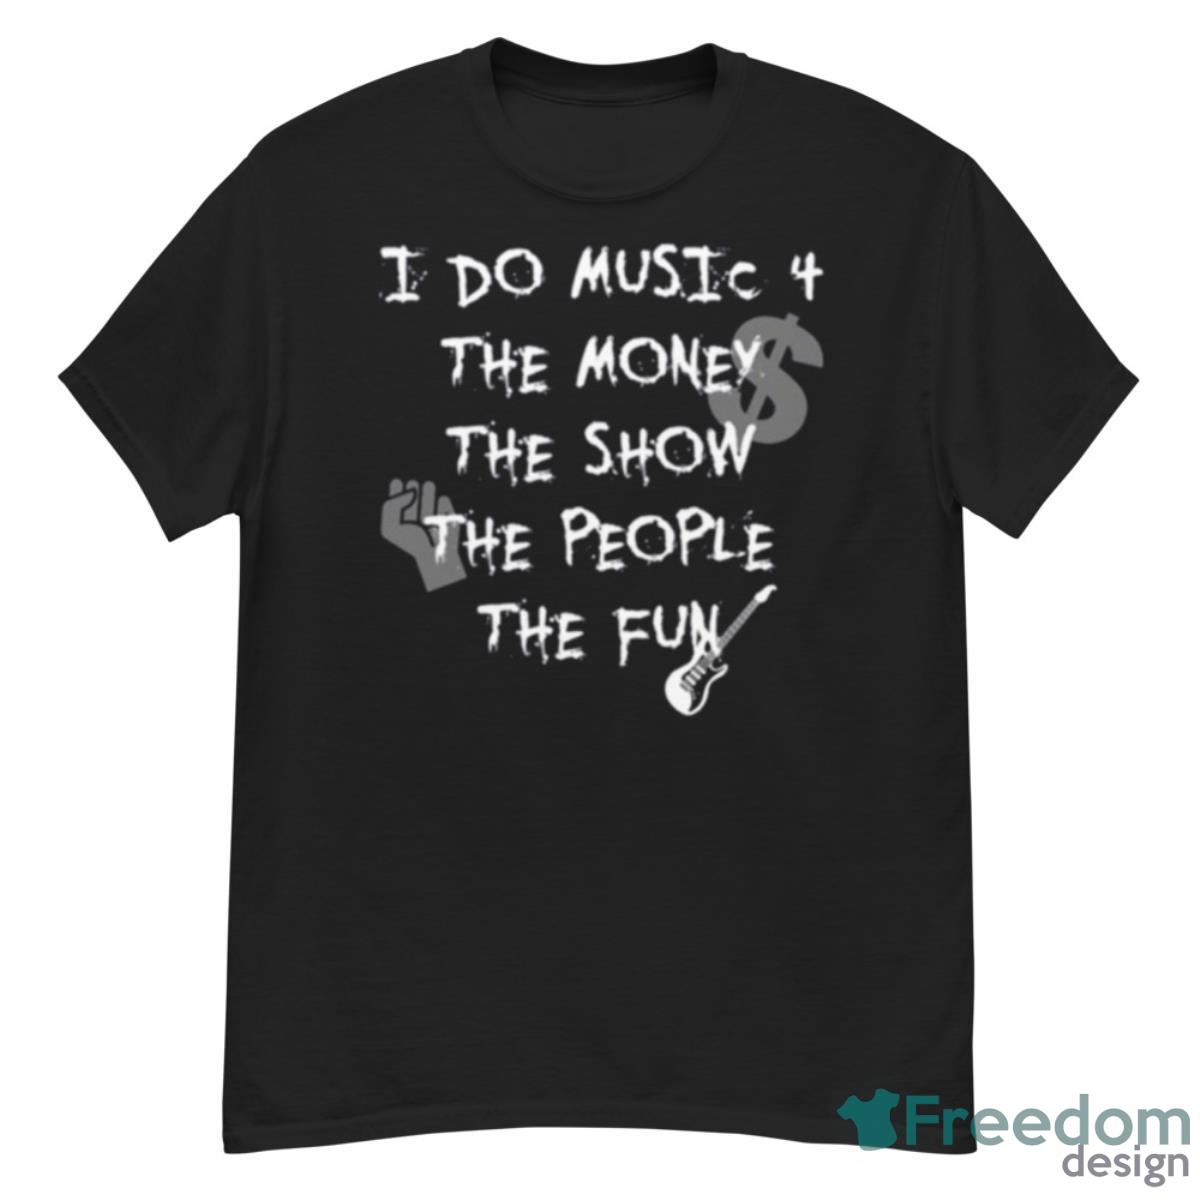 The Real Reason For Music Shirt - G500 Men’s Classic T-Shirt